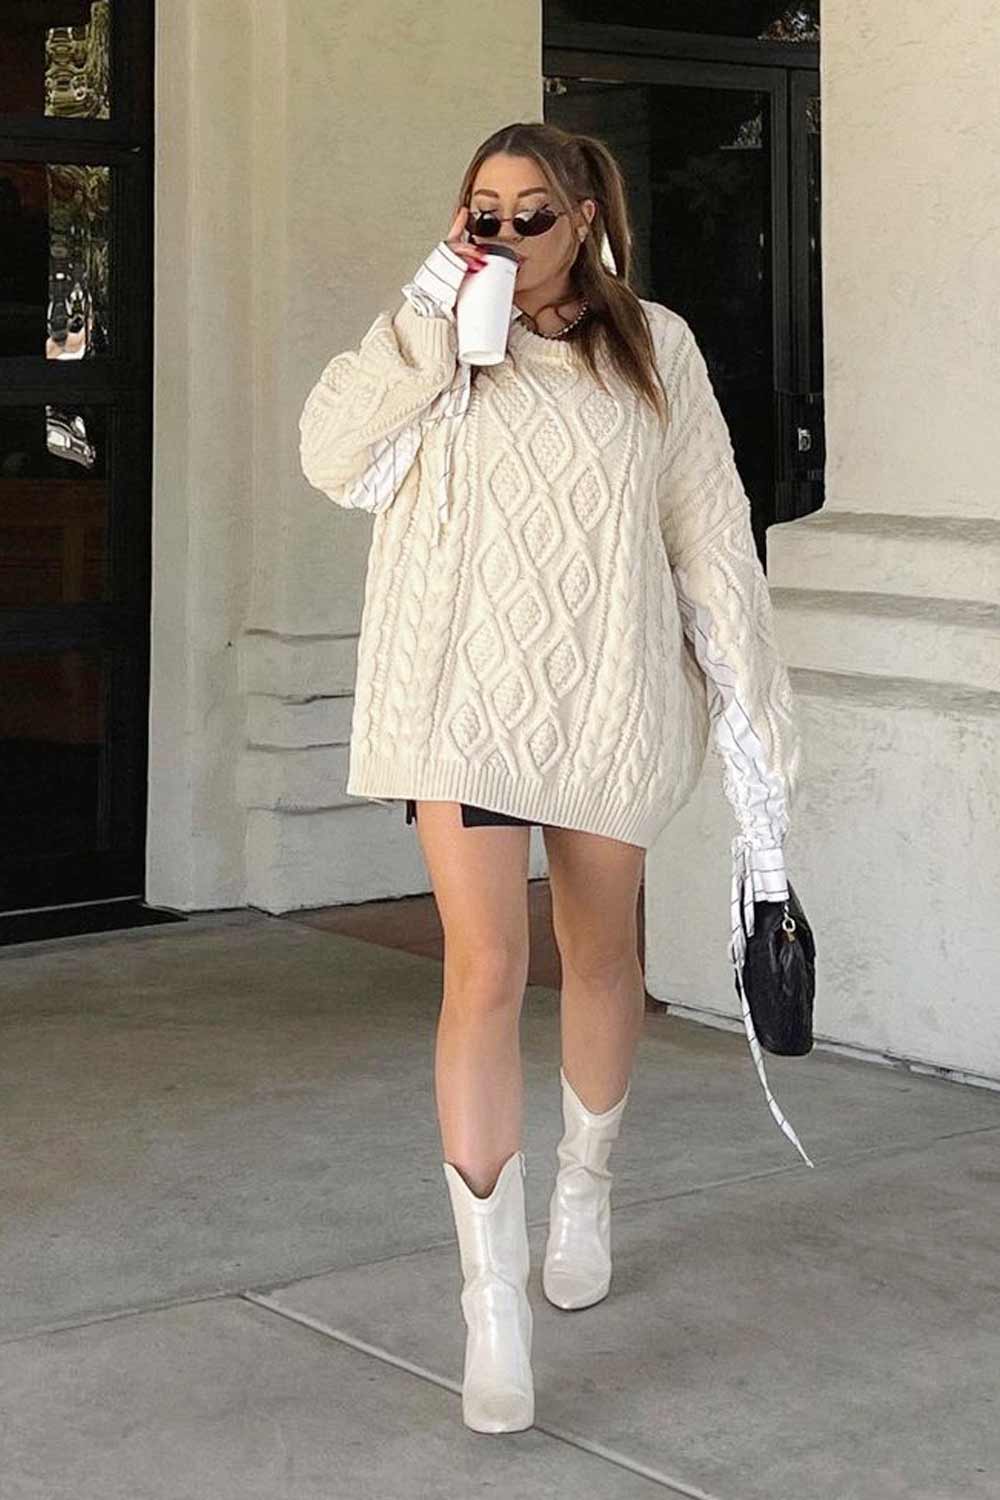 Oversize Sweater with High Boots Fall Outfits